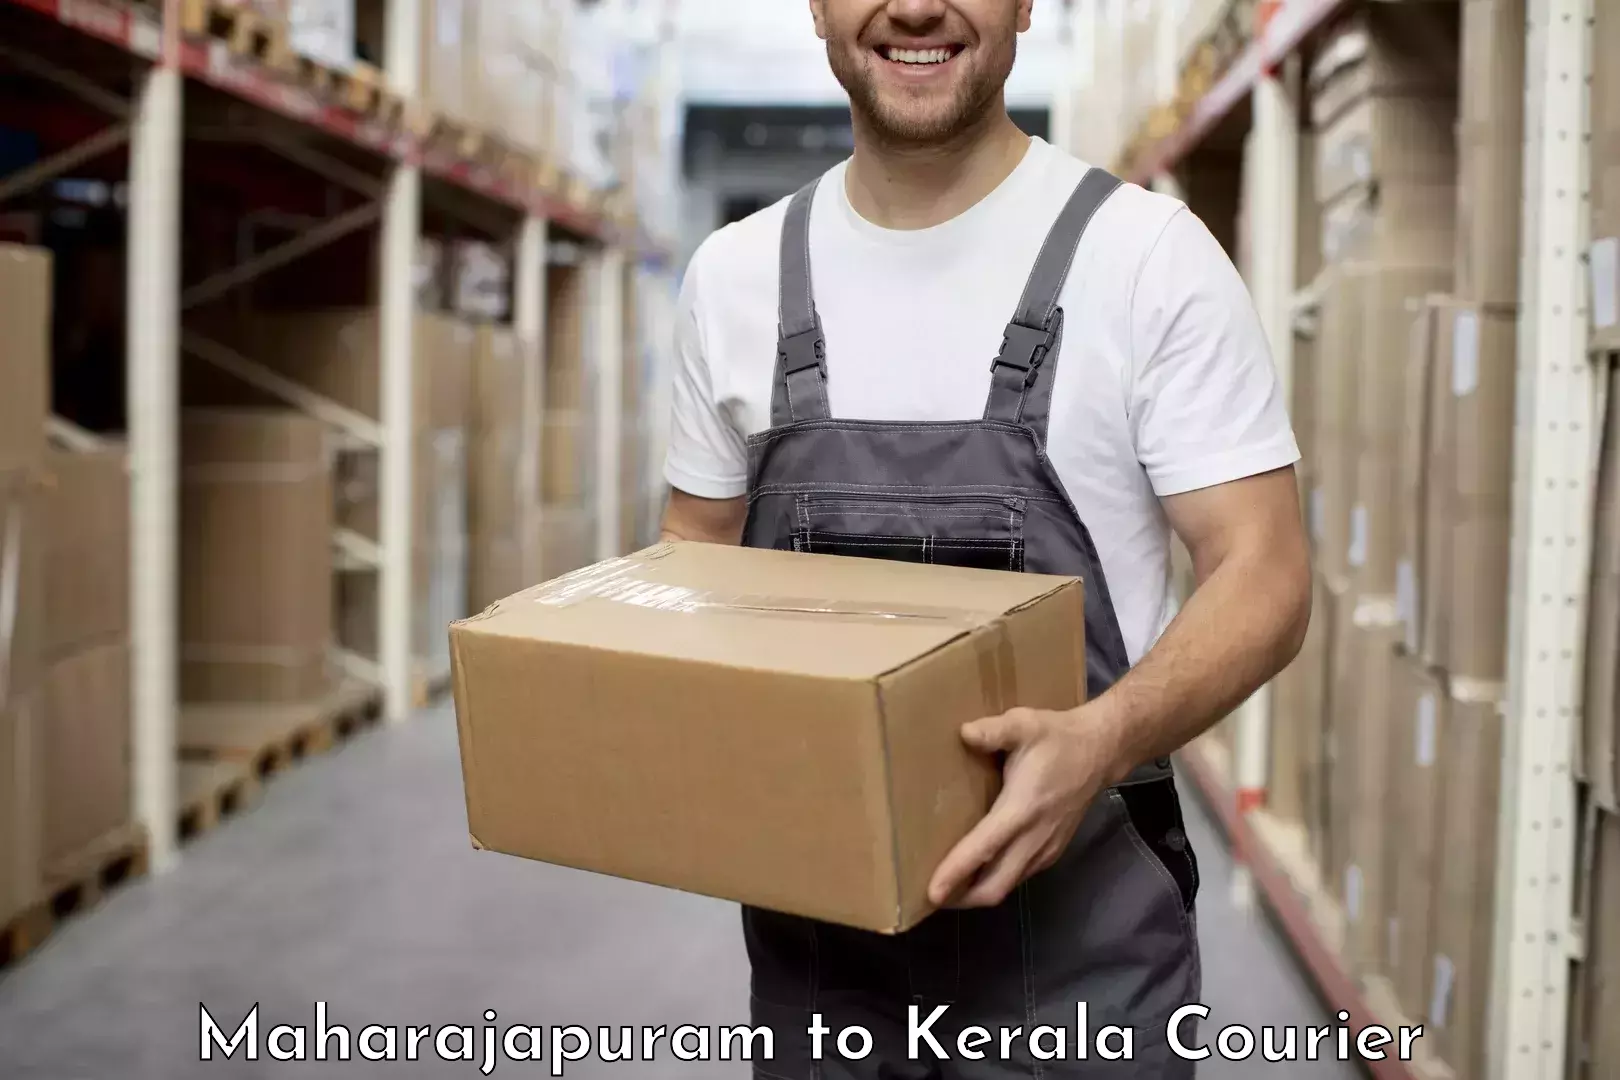 Package delivery network Maharajapuram to Cochin Port Kochi